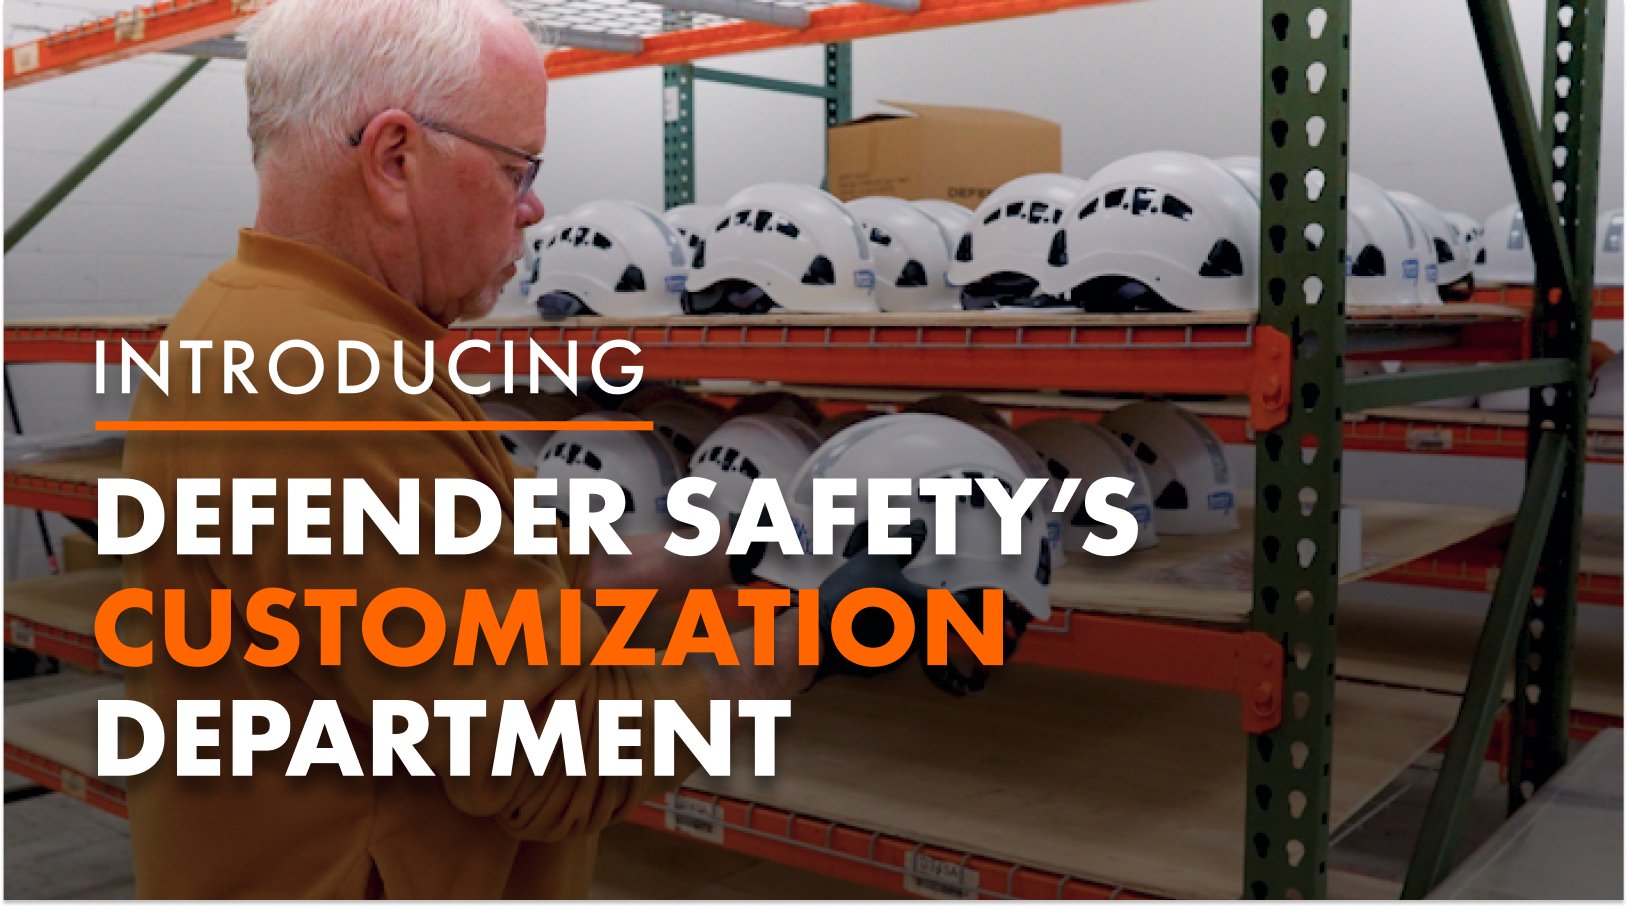 Introducing Defender Safety's New Customization Department - Defender Safety